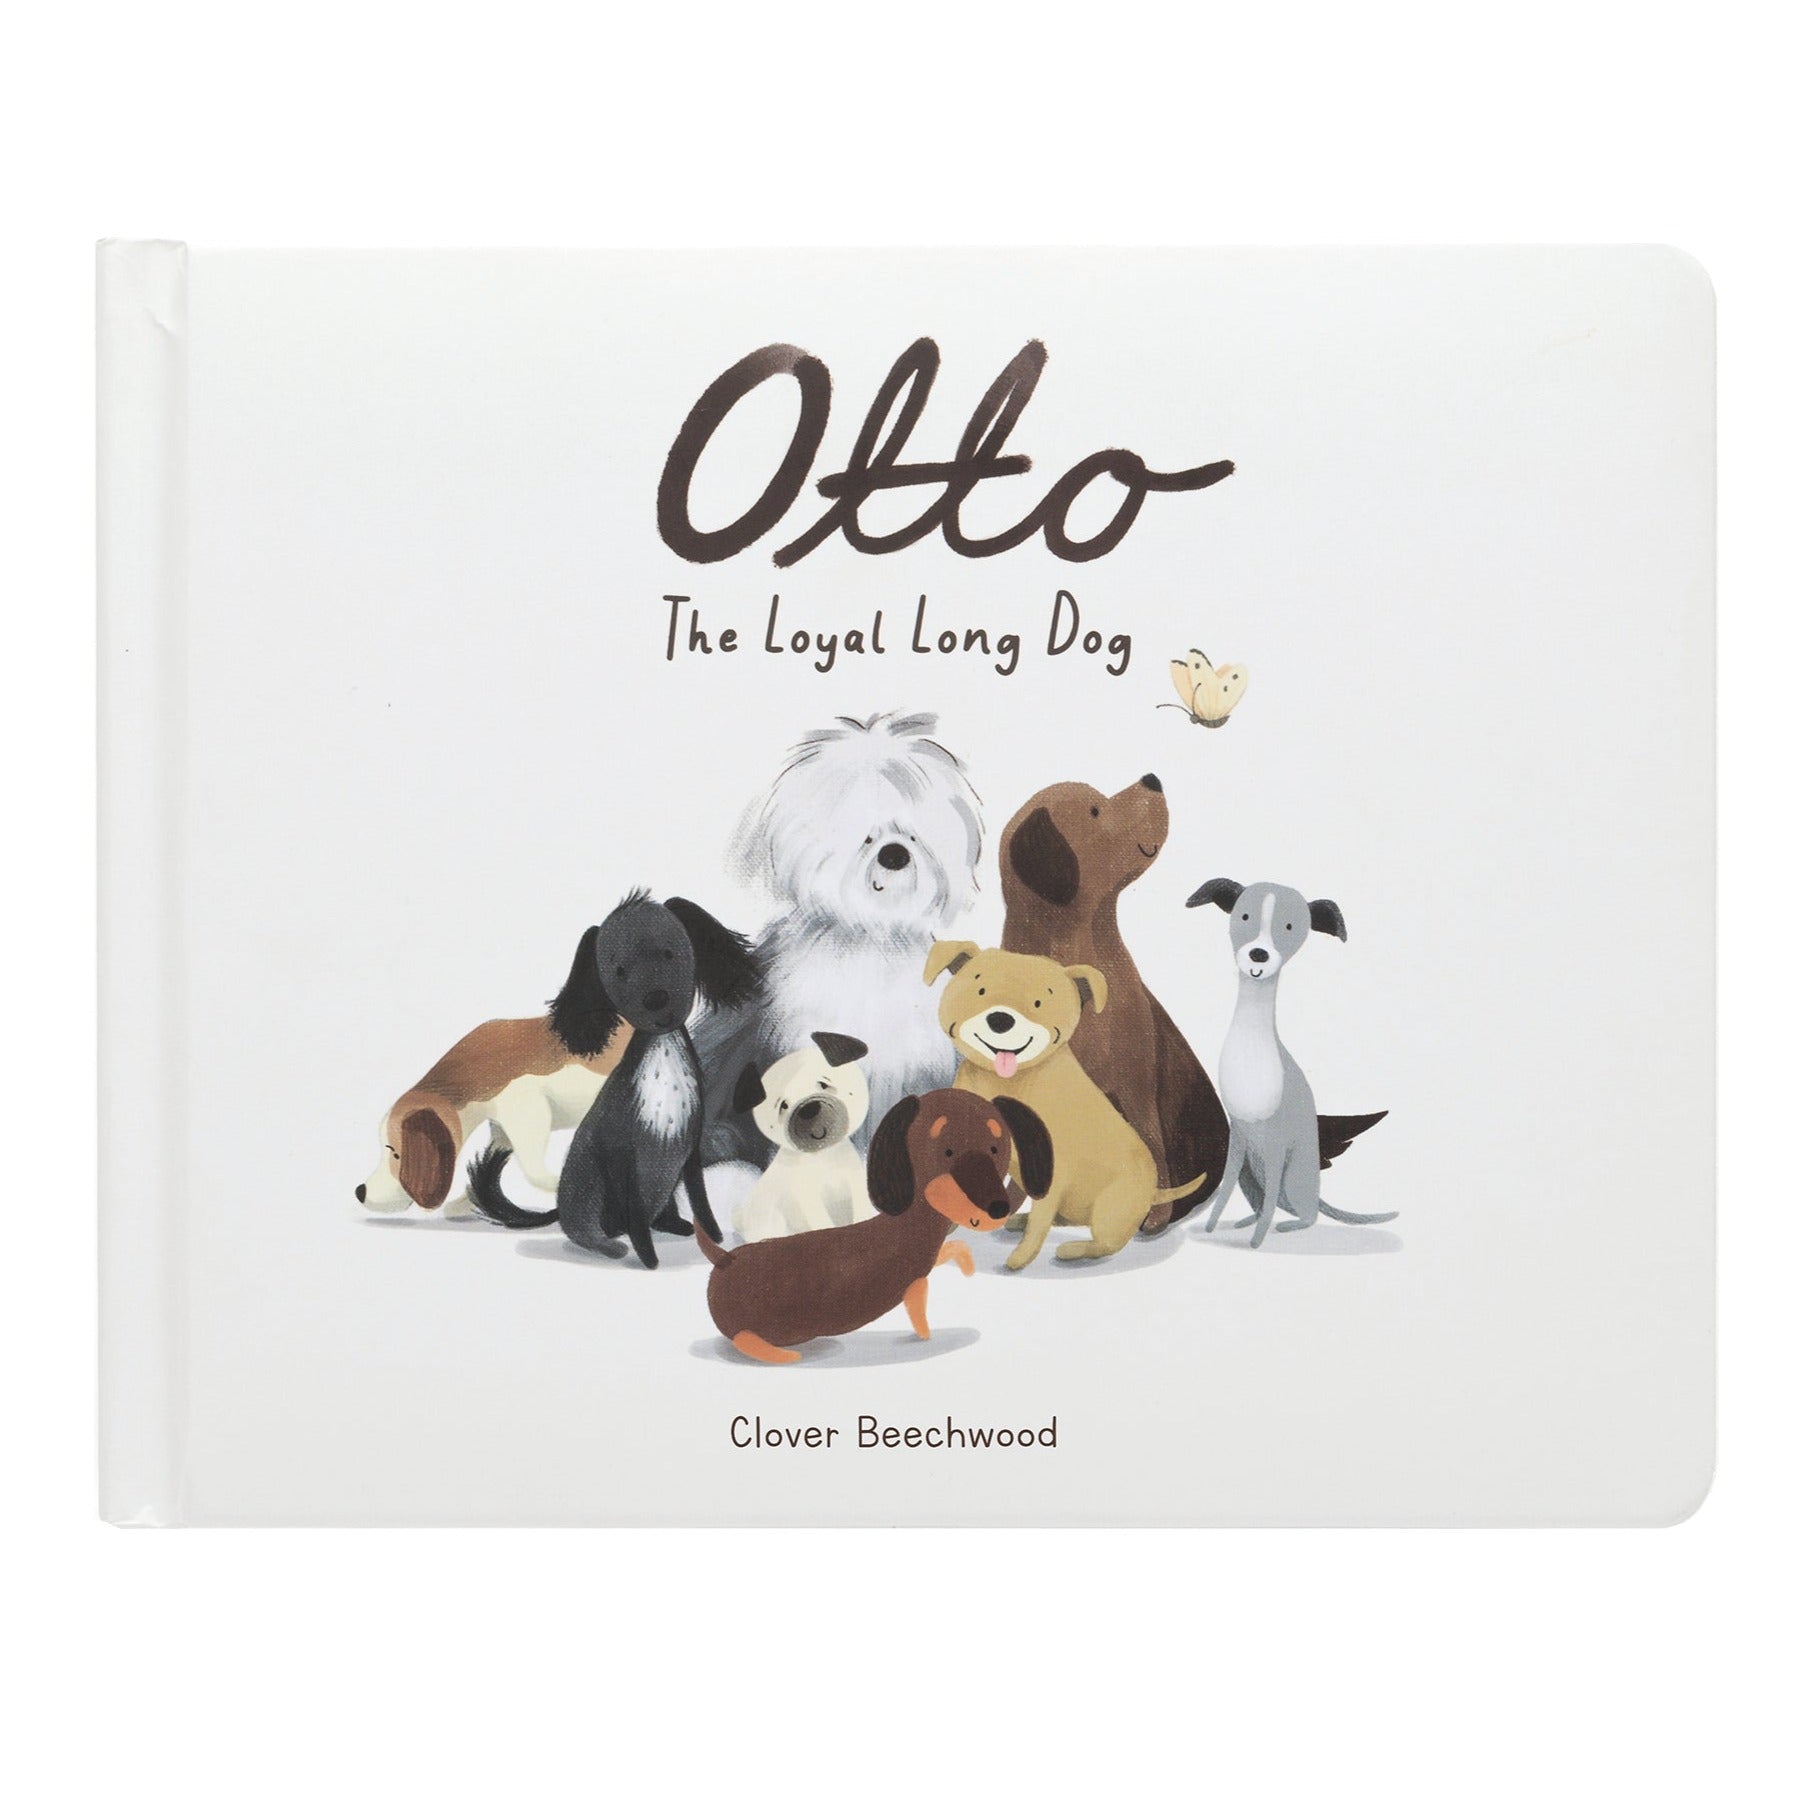 "Otto the Loyal Long Dog" Children's Book